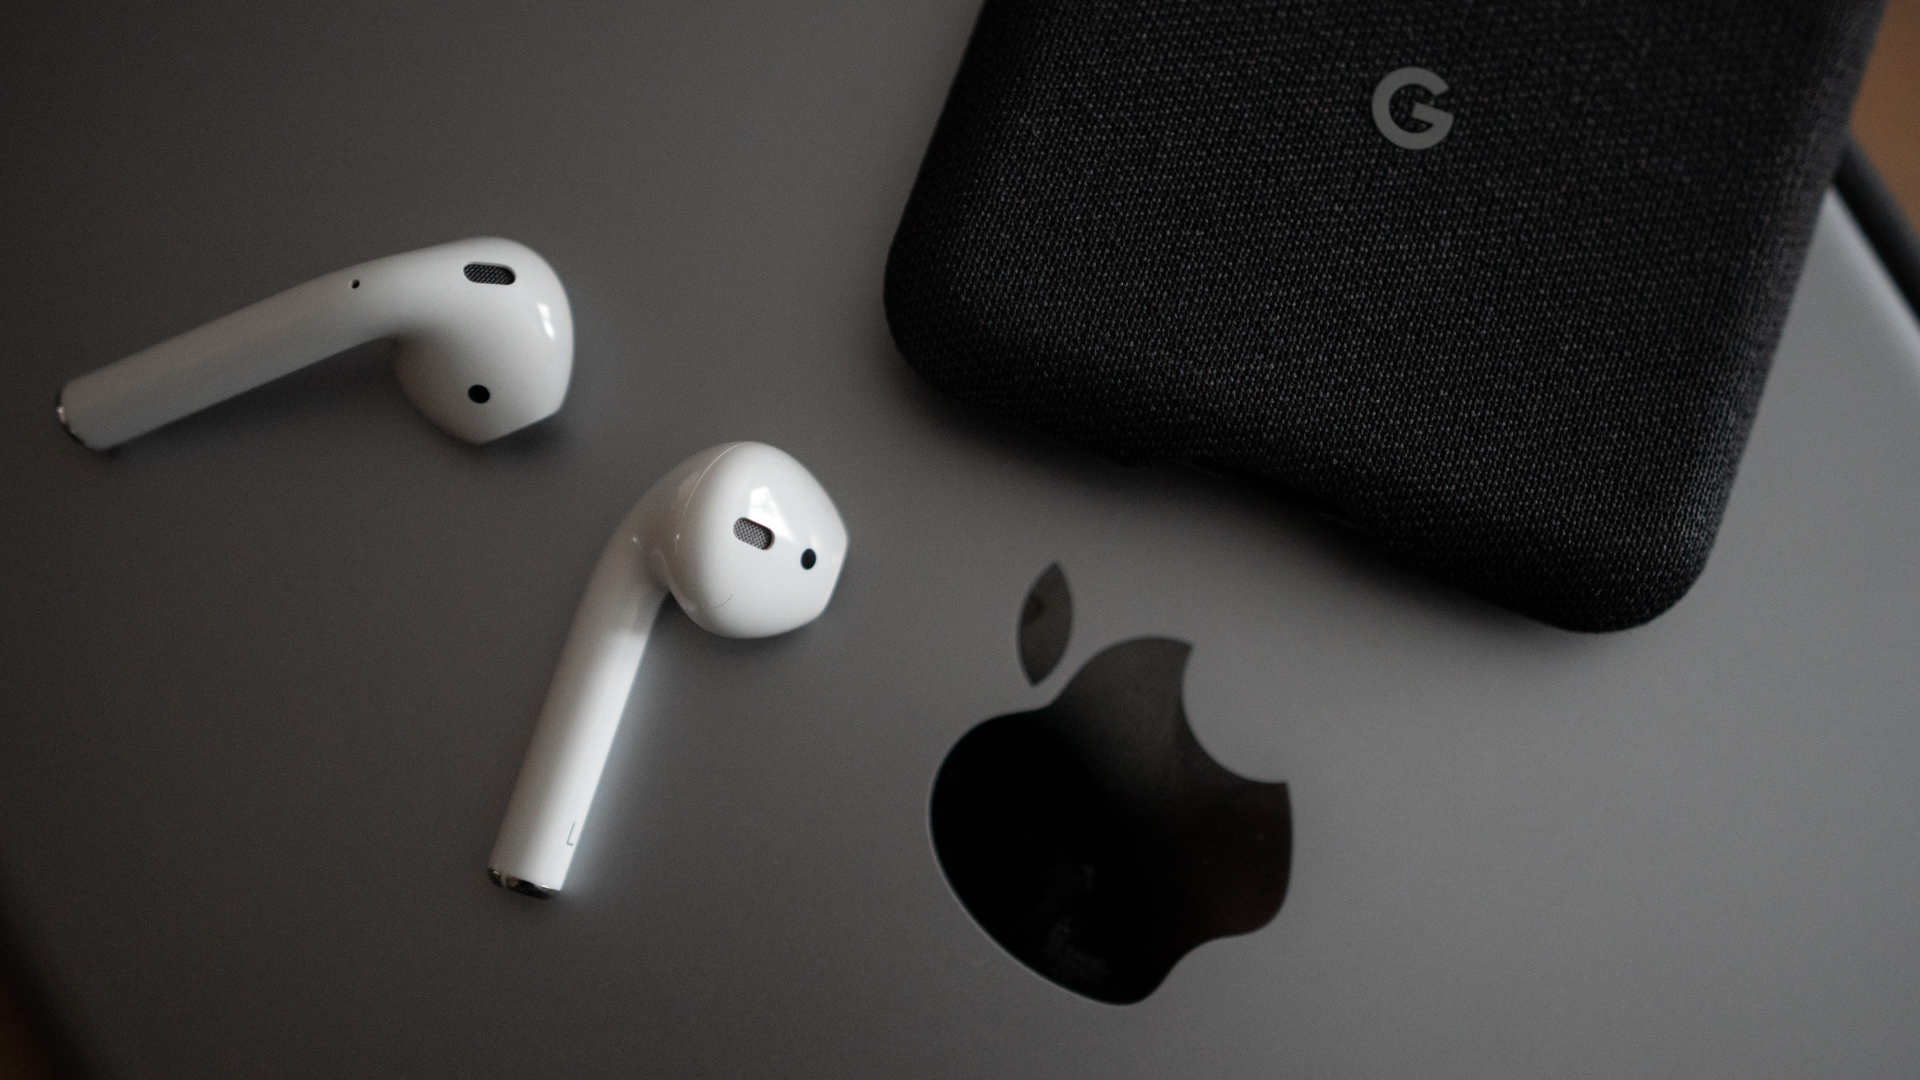 Airpods space. Apple AIRPODS 2. Наушники Apple AIRPODS Pro 2nd Generation. Iphone AIRPODS 2. Apple AIRPODS 3rd Generation.